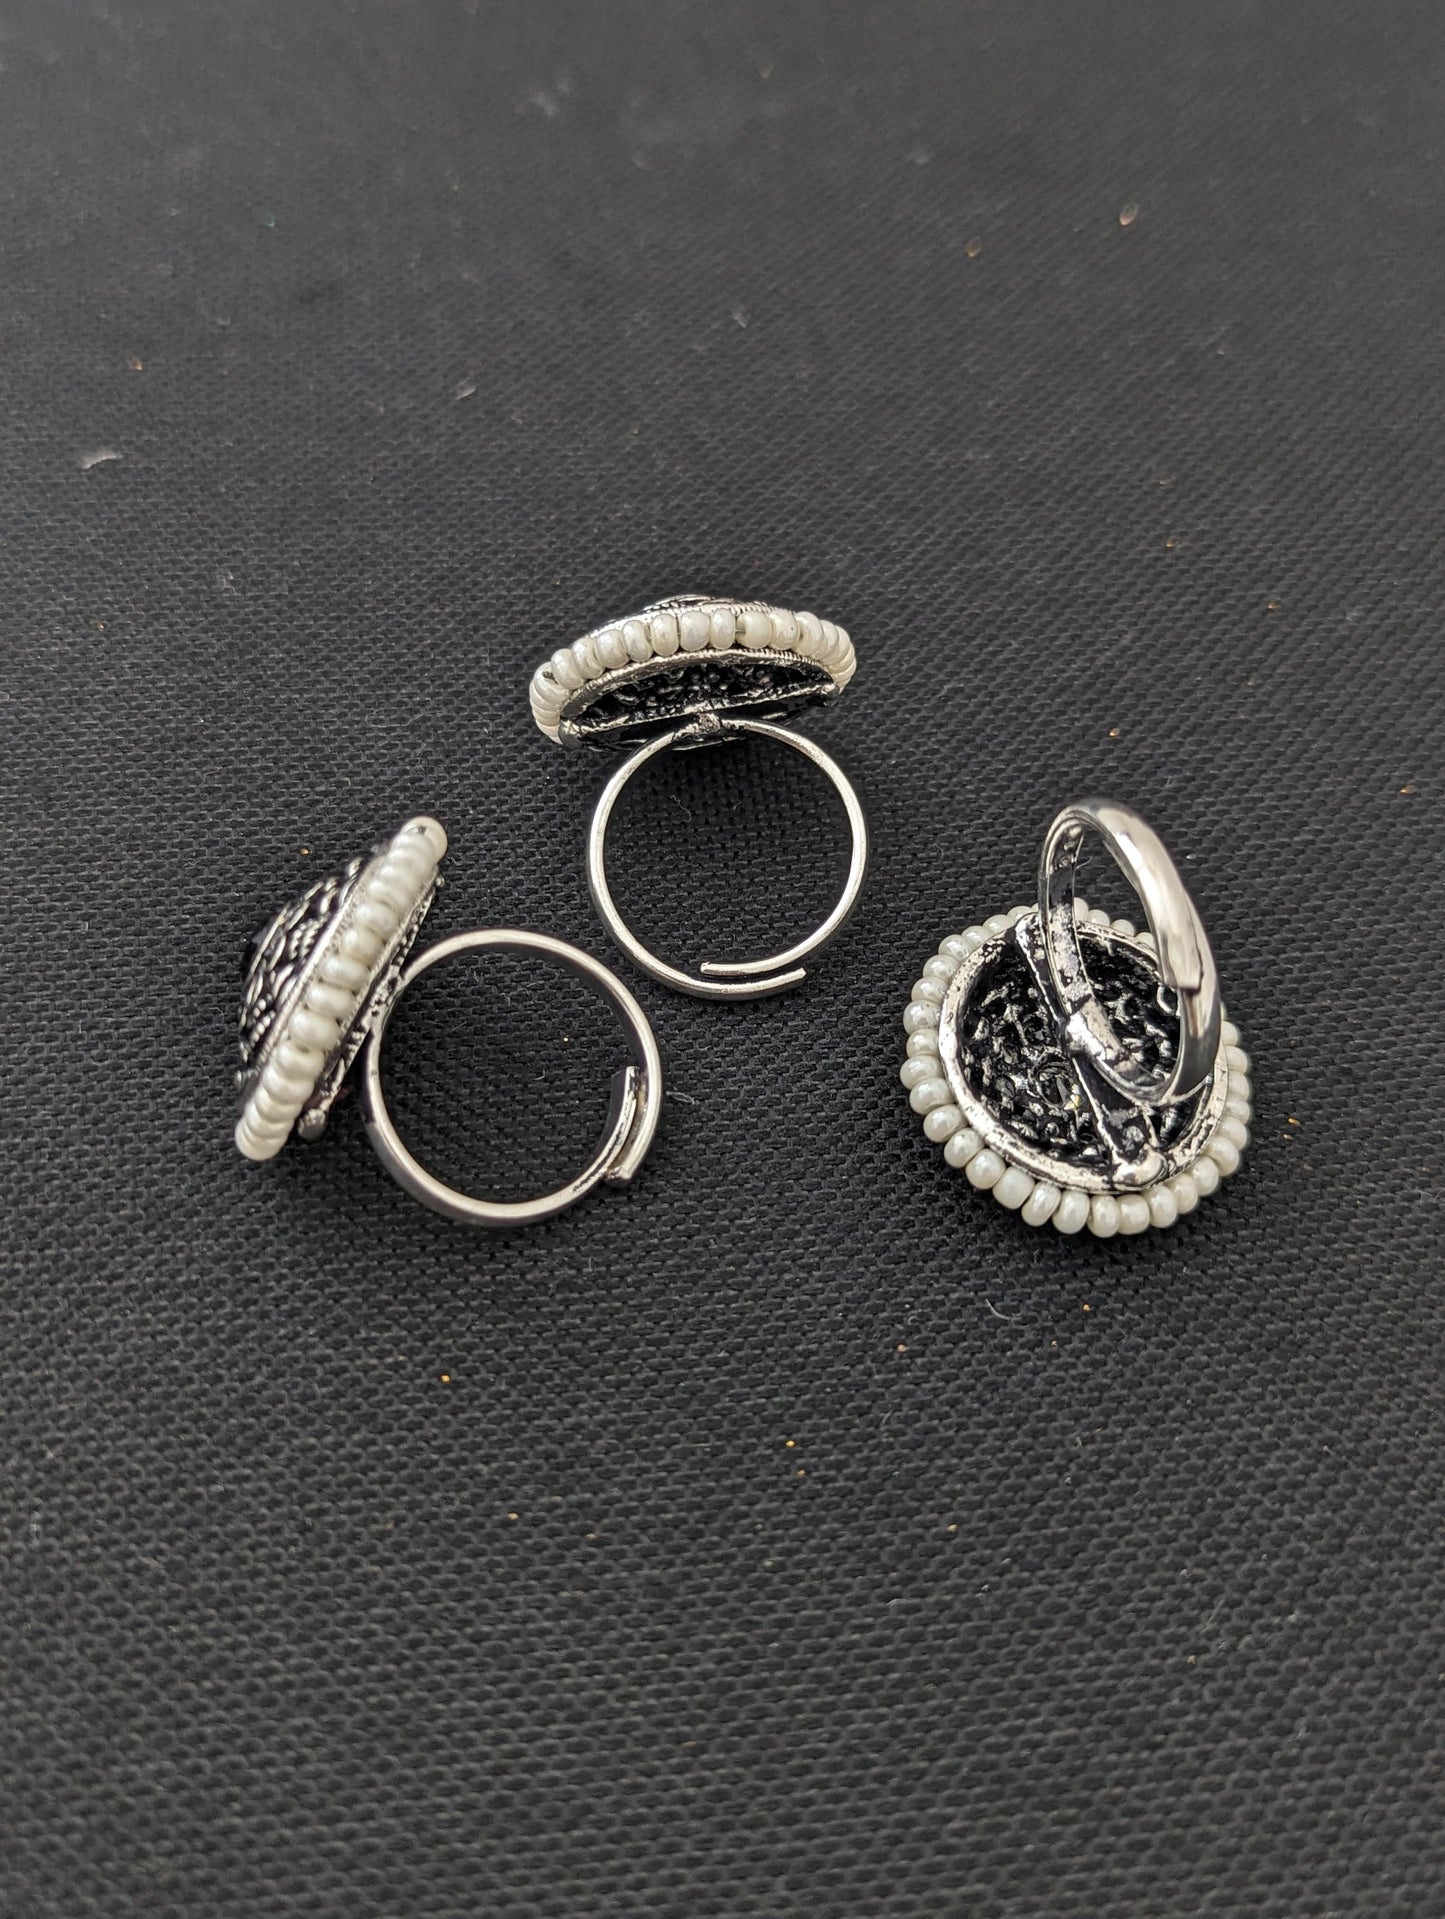 Oxidized  Silver CZ stone Adjustable Finger ring